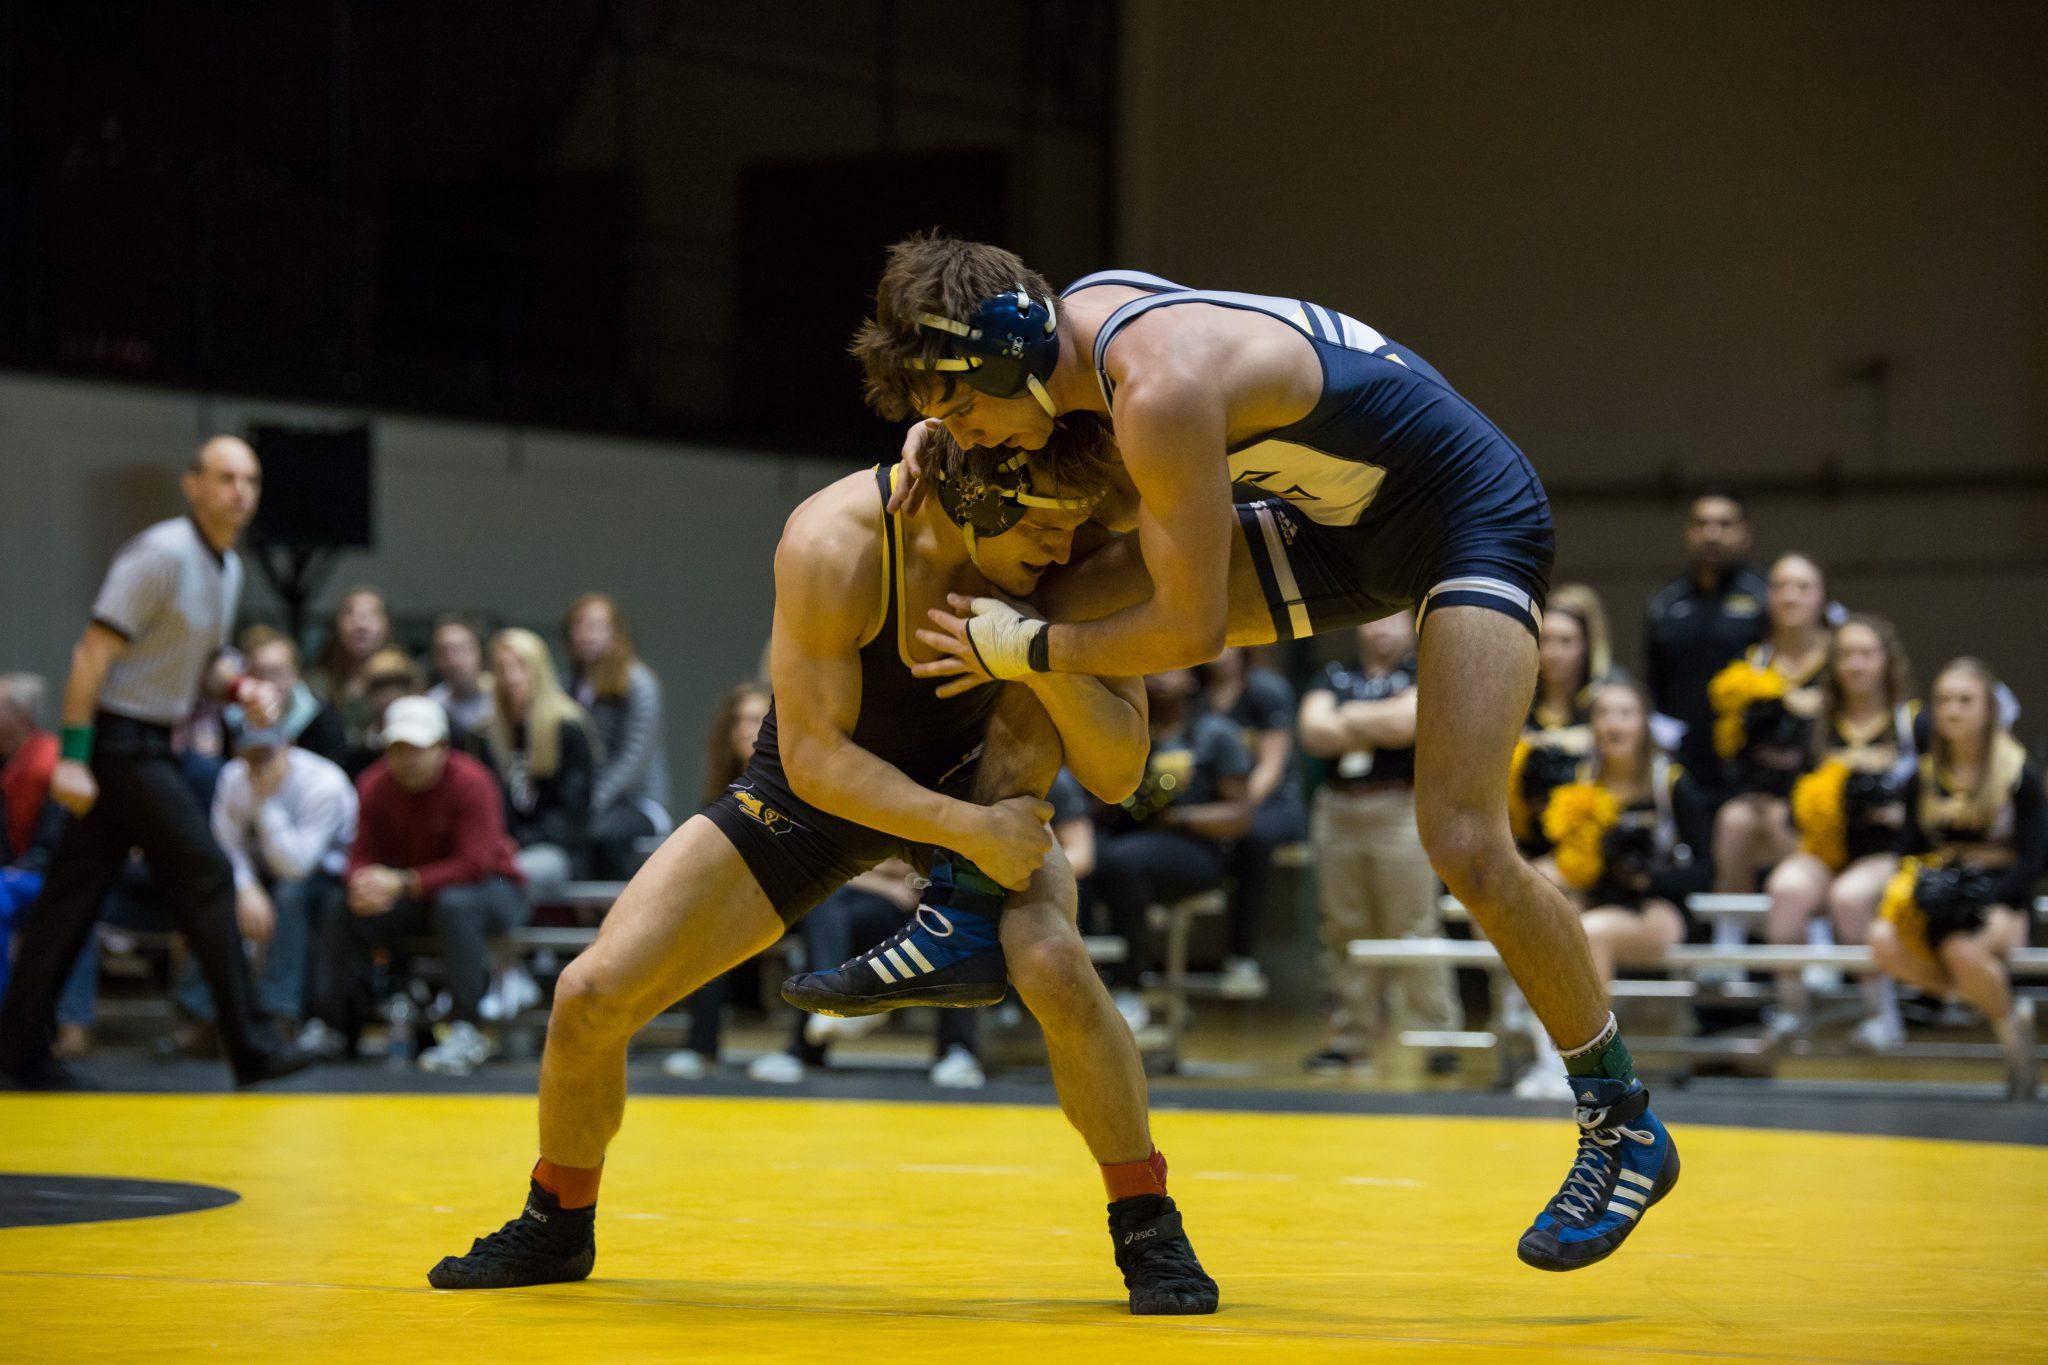 The Mountaineer’s Matt Zivistoski attempts to take down Chattanooga’s Roman Boylen. Following a 16-16 tie, the Mountaineers stayed undefeated in the SoCon with a 55-54 tiebreaker over the Mocs.